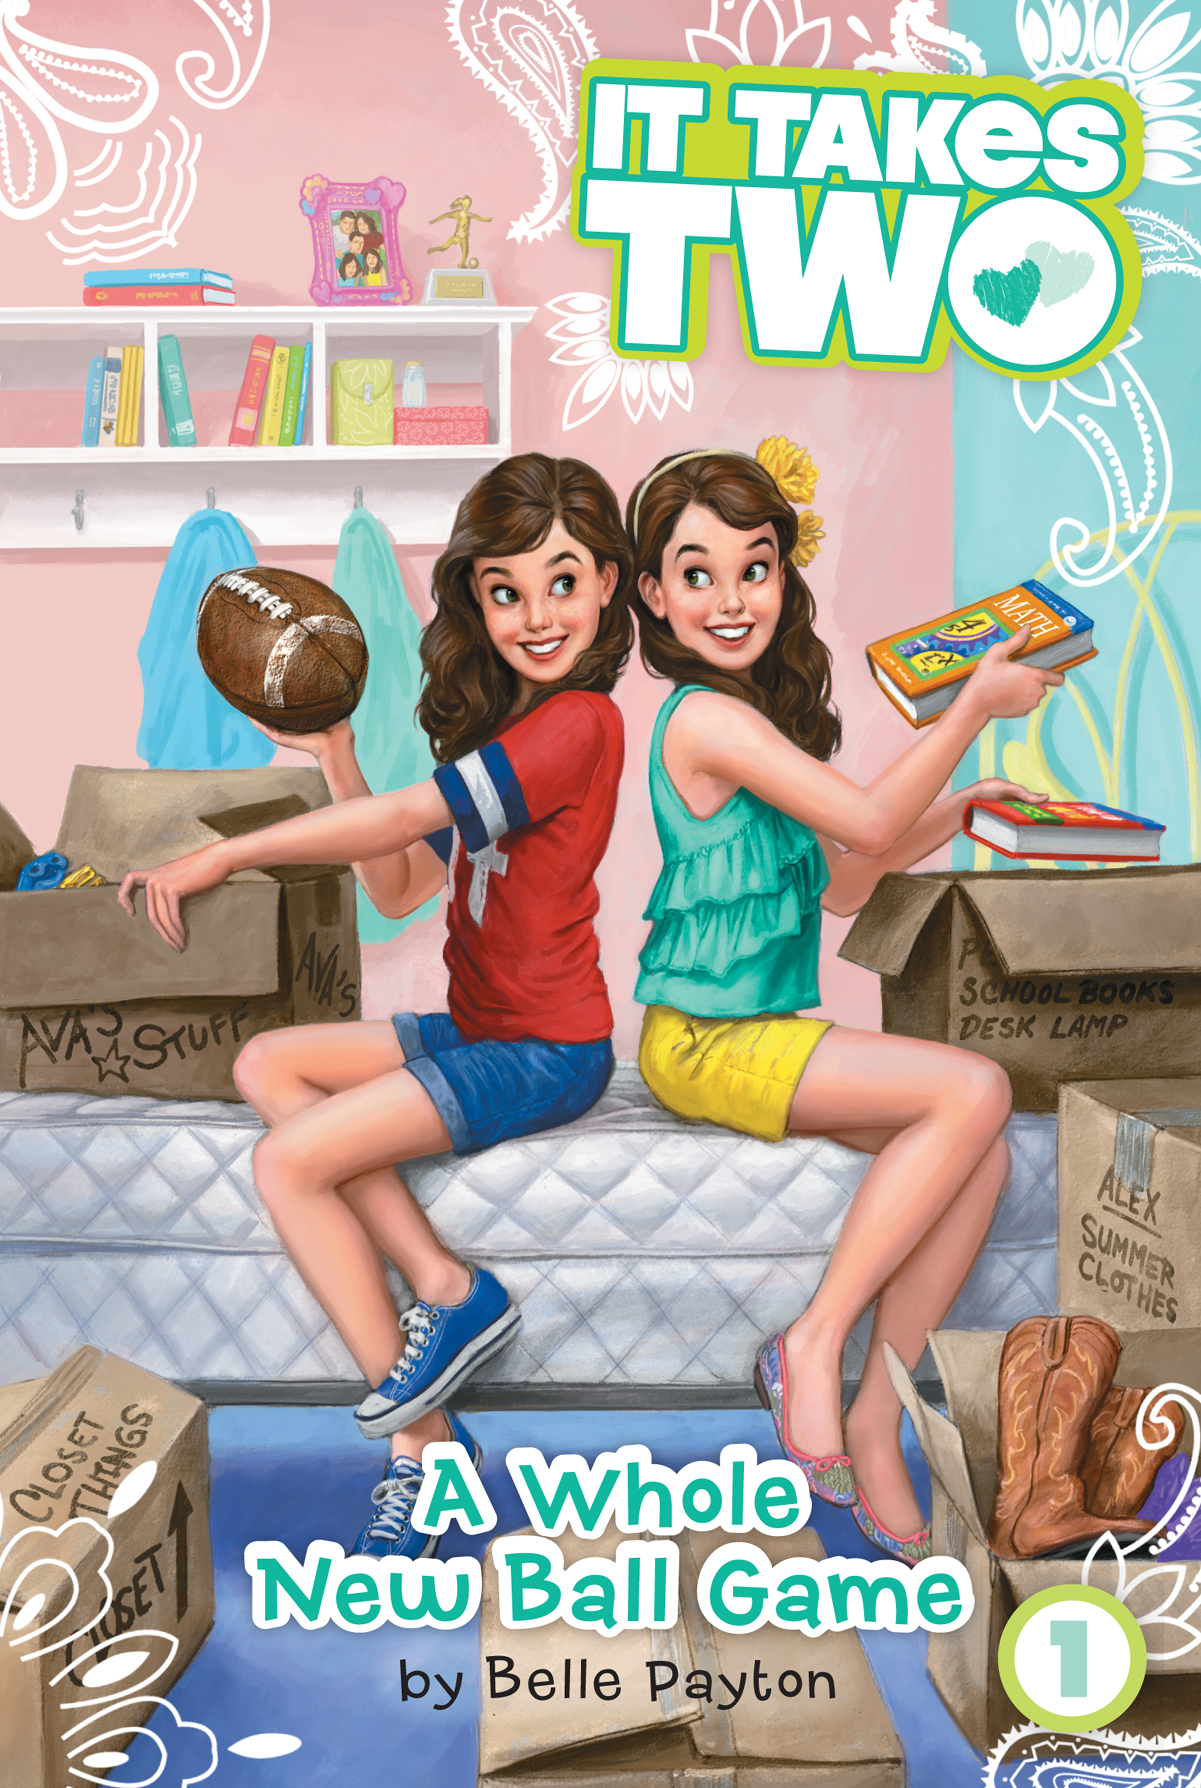 A Whole New Ball Game by Belle Payton